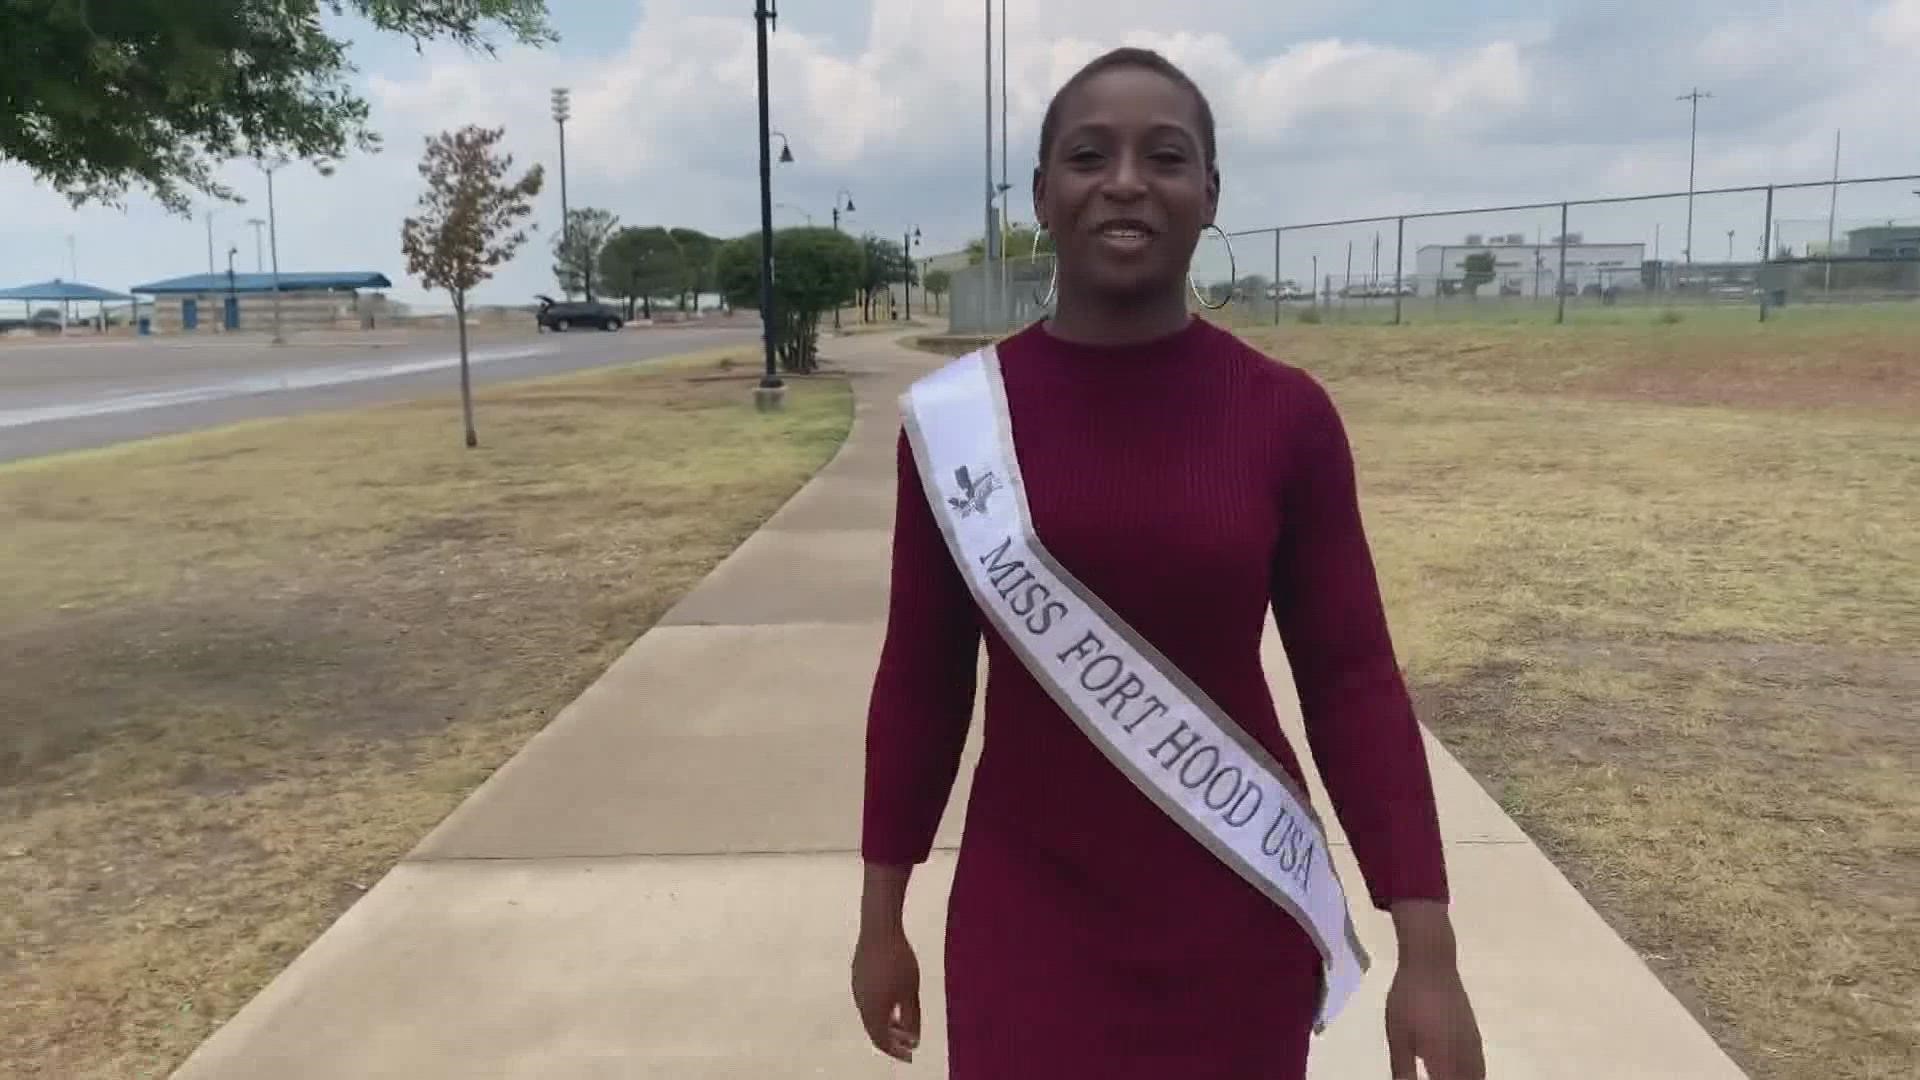 Kandice Harmon is competing for the crown. If she wins, she would be the first active duty soldier to win the title.